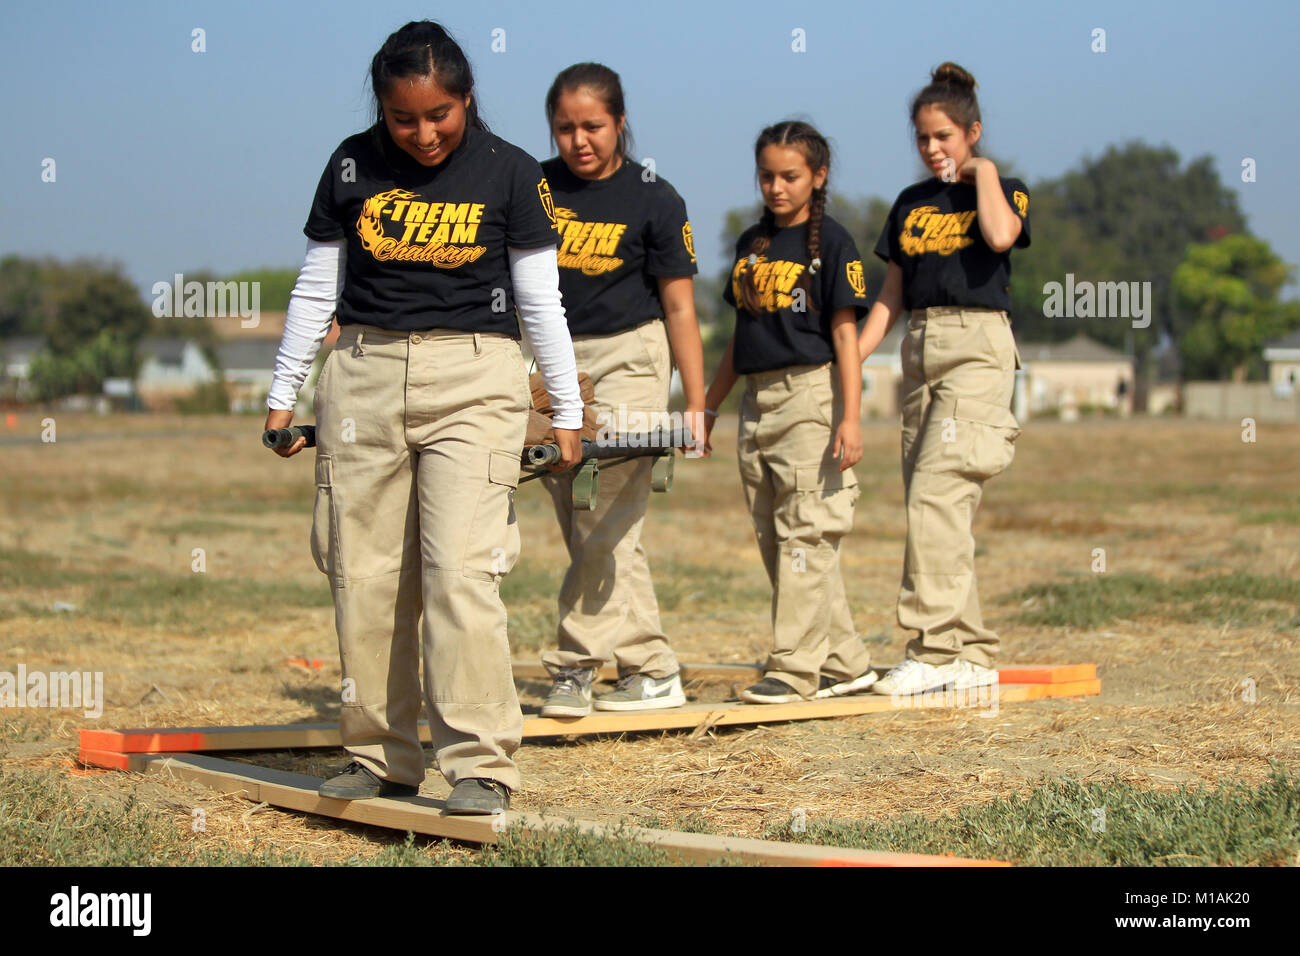 California Cadet Corps Cadet Jocelyn Perez, an eighth grader at Frank L. Walton Middle School in Compton, California, leads her team across a balance beam while carrying a sandbags on a litter Oct. 28, 2017, during the California Cadet Corps Xtreme Team Challenge at Joint Forces Training Base Los Alamitos, California. Cadets persevered through four aspects of the litter carry challenge including the balance beam, ascending and descending a tower, overhead carry, and low-crawl. (Air National Guard photo by Senior Airman Crystal Housman) Stock Photo